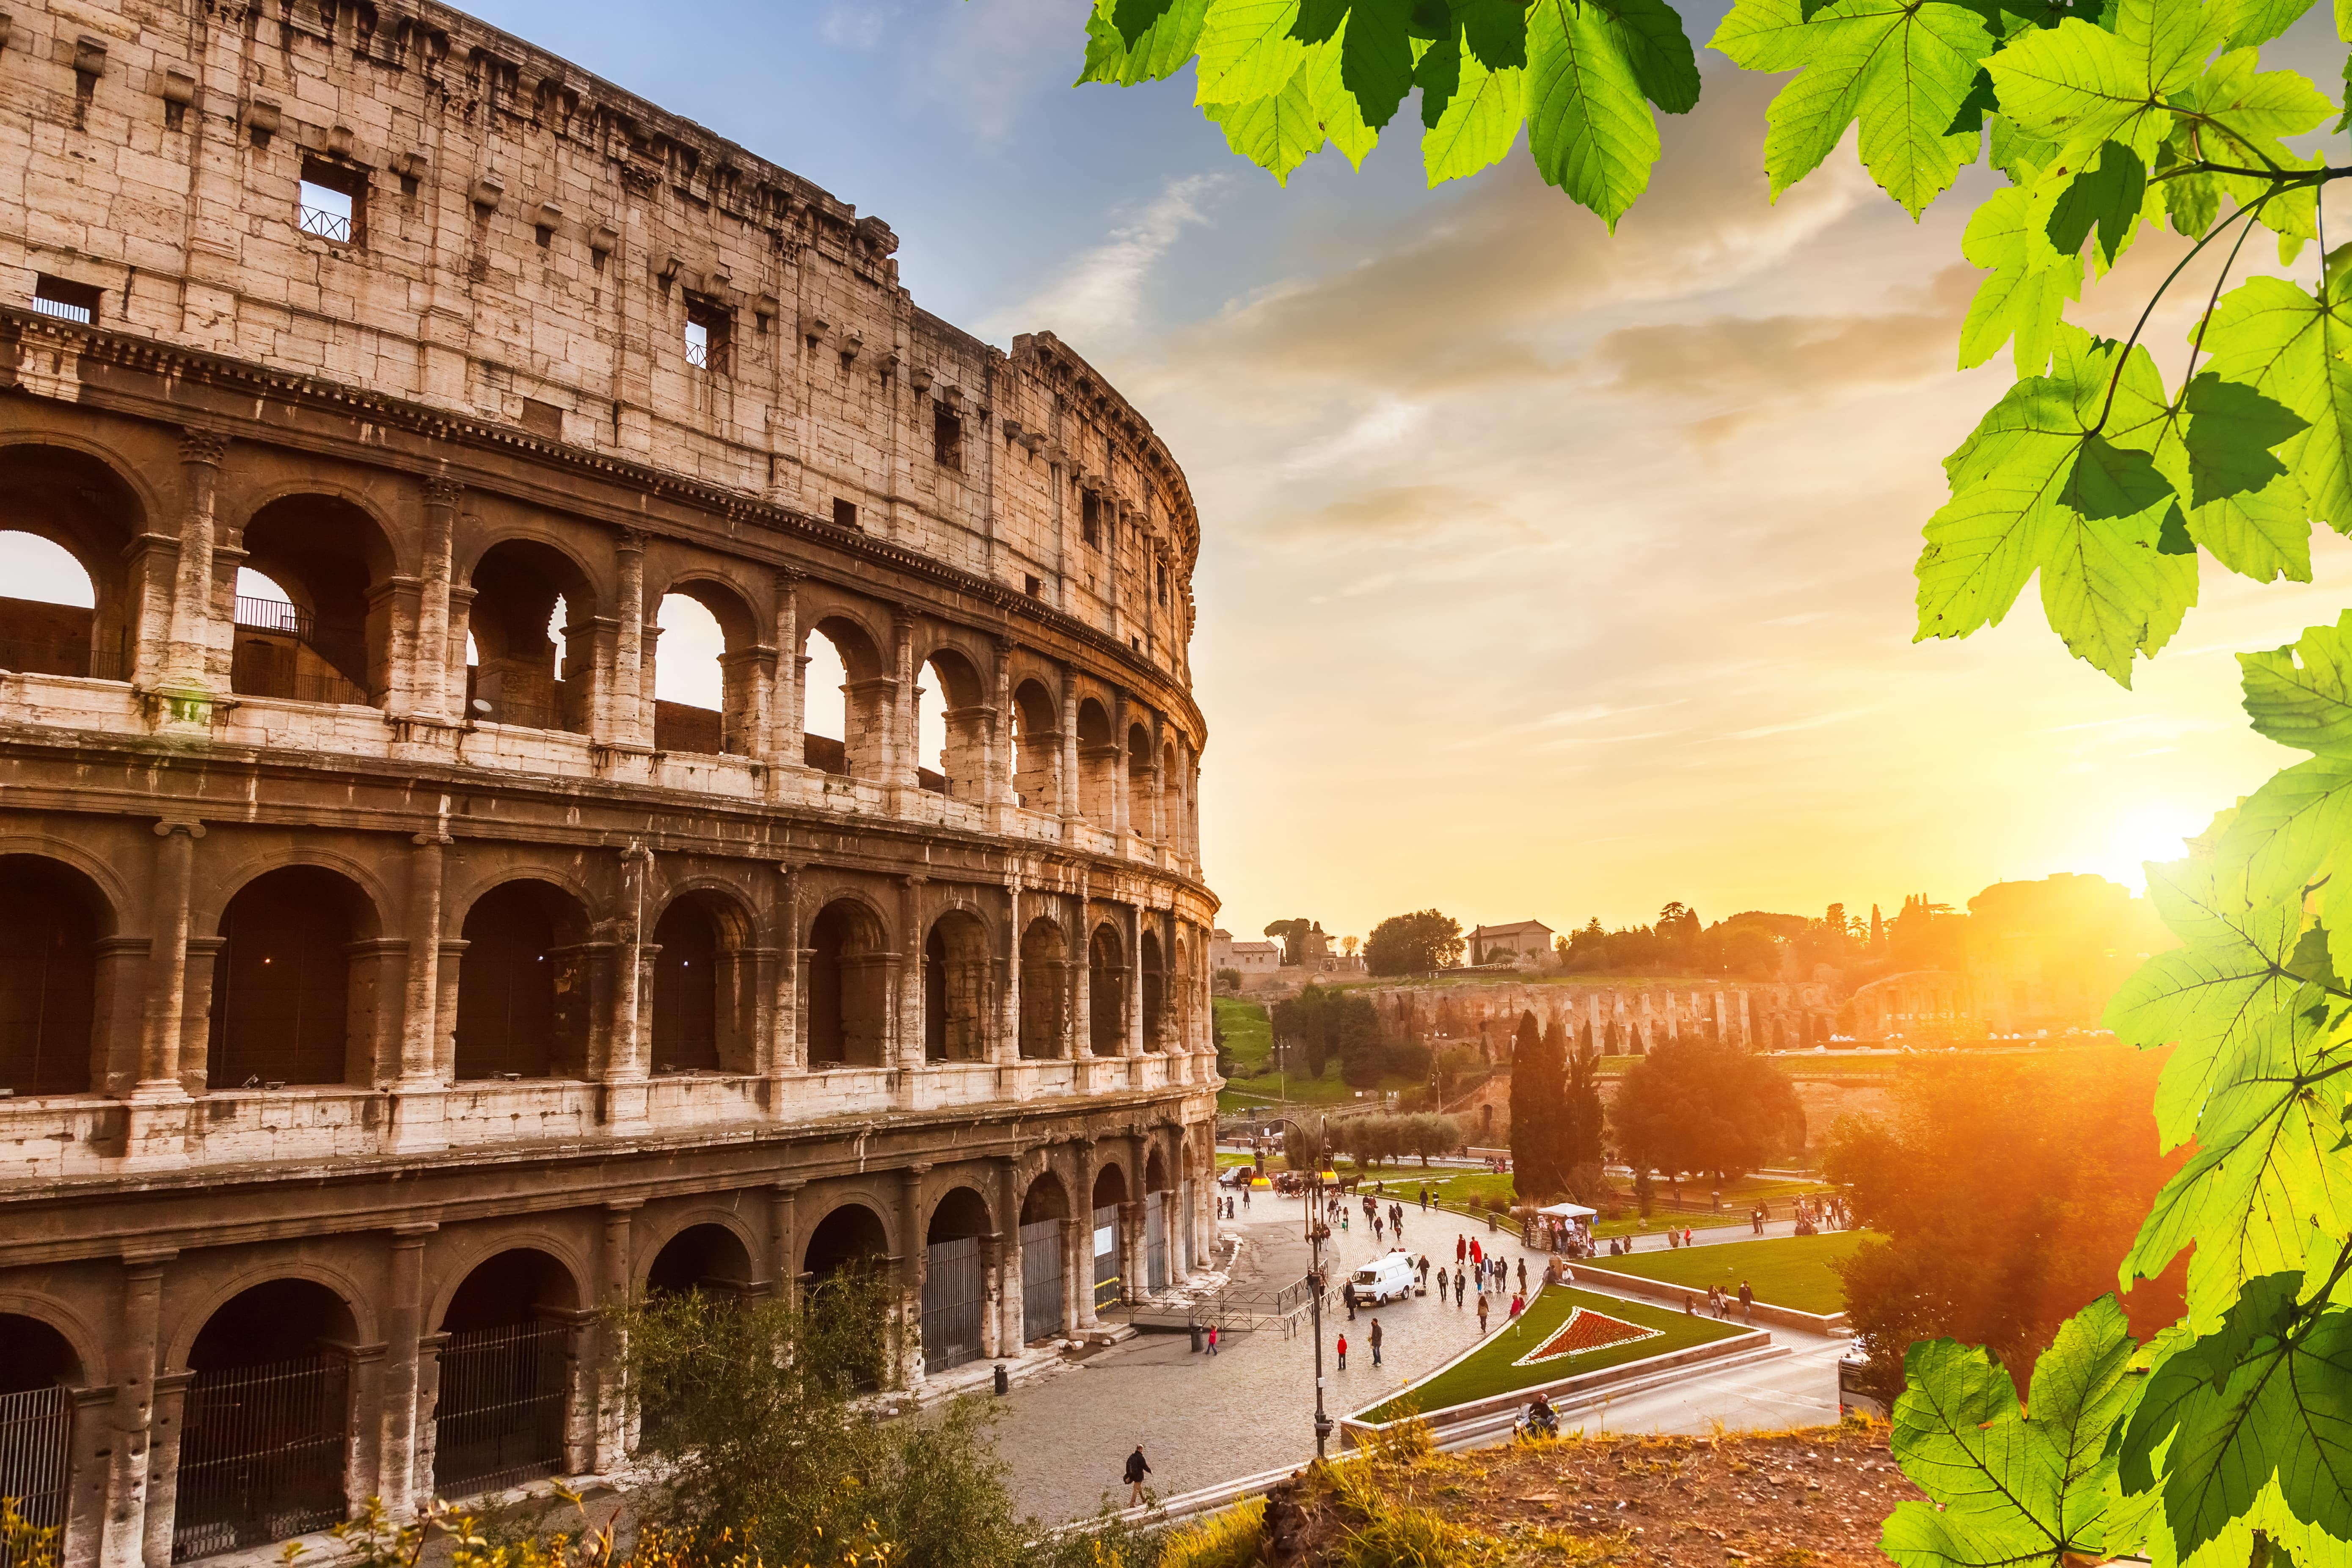 Picture of the Colosseum during sunset, with a bright green tree on the right